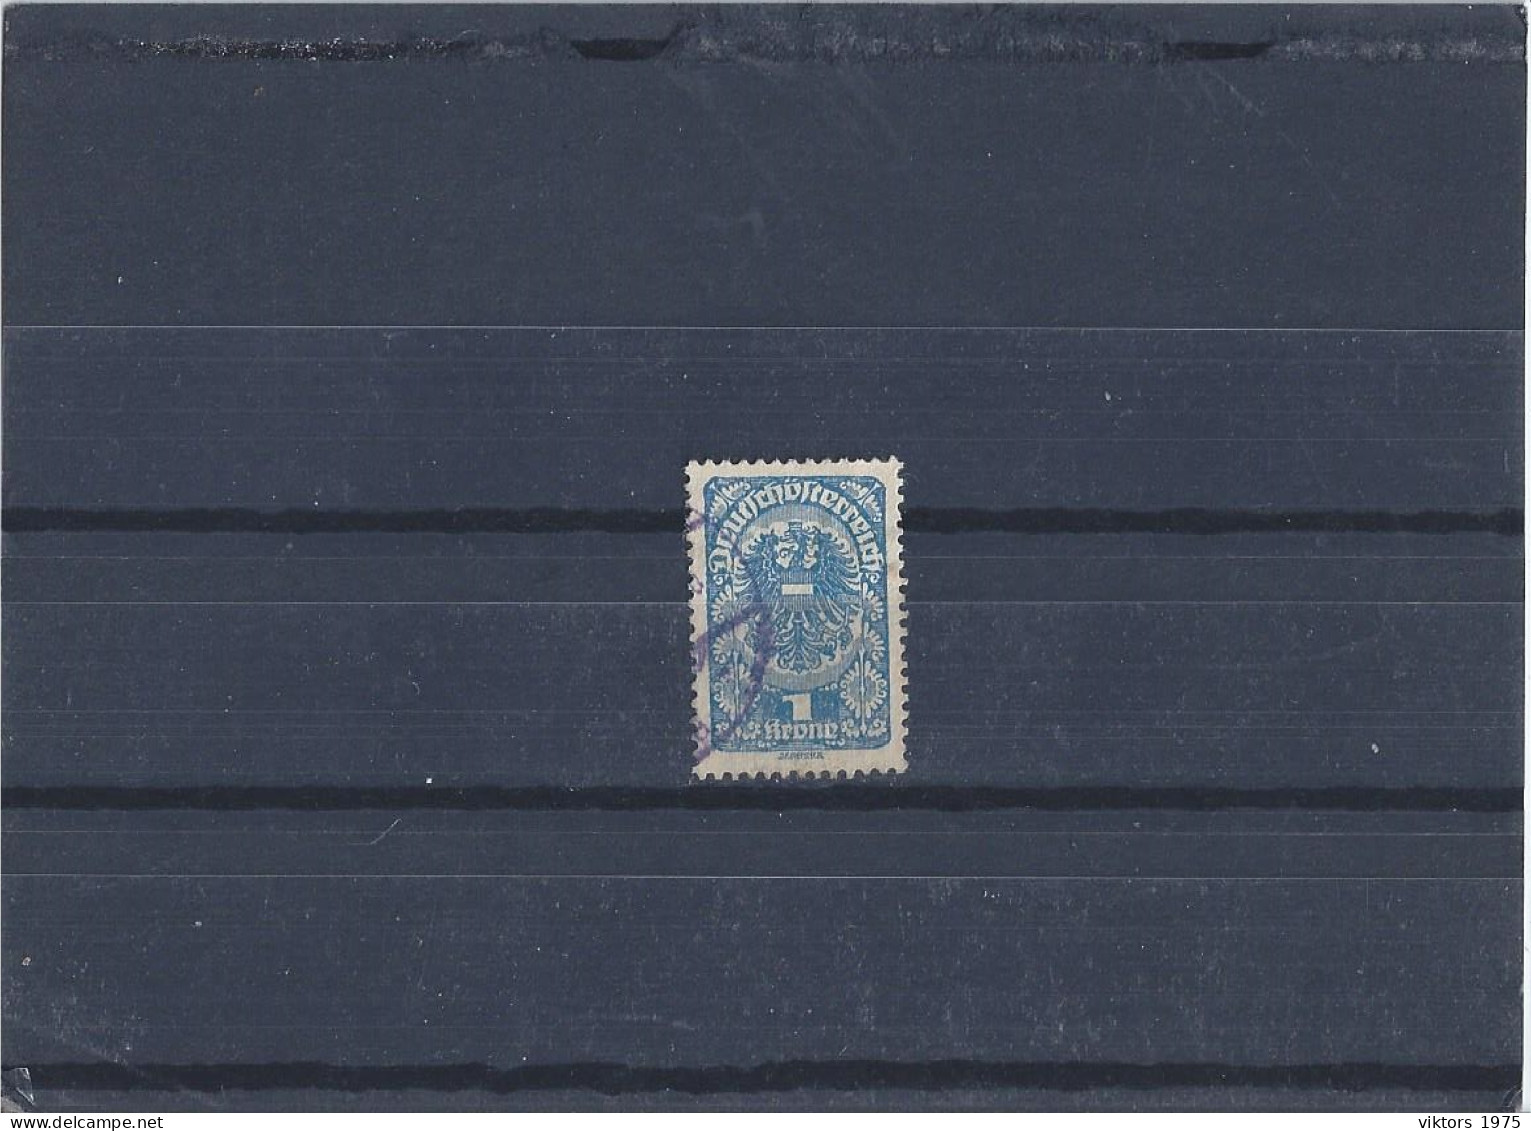 Used Stamp Nr.274 In MICHEL Catalog - Used Stamps